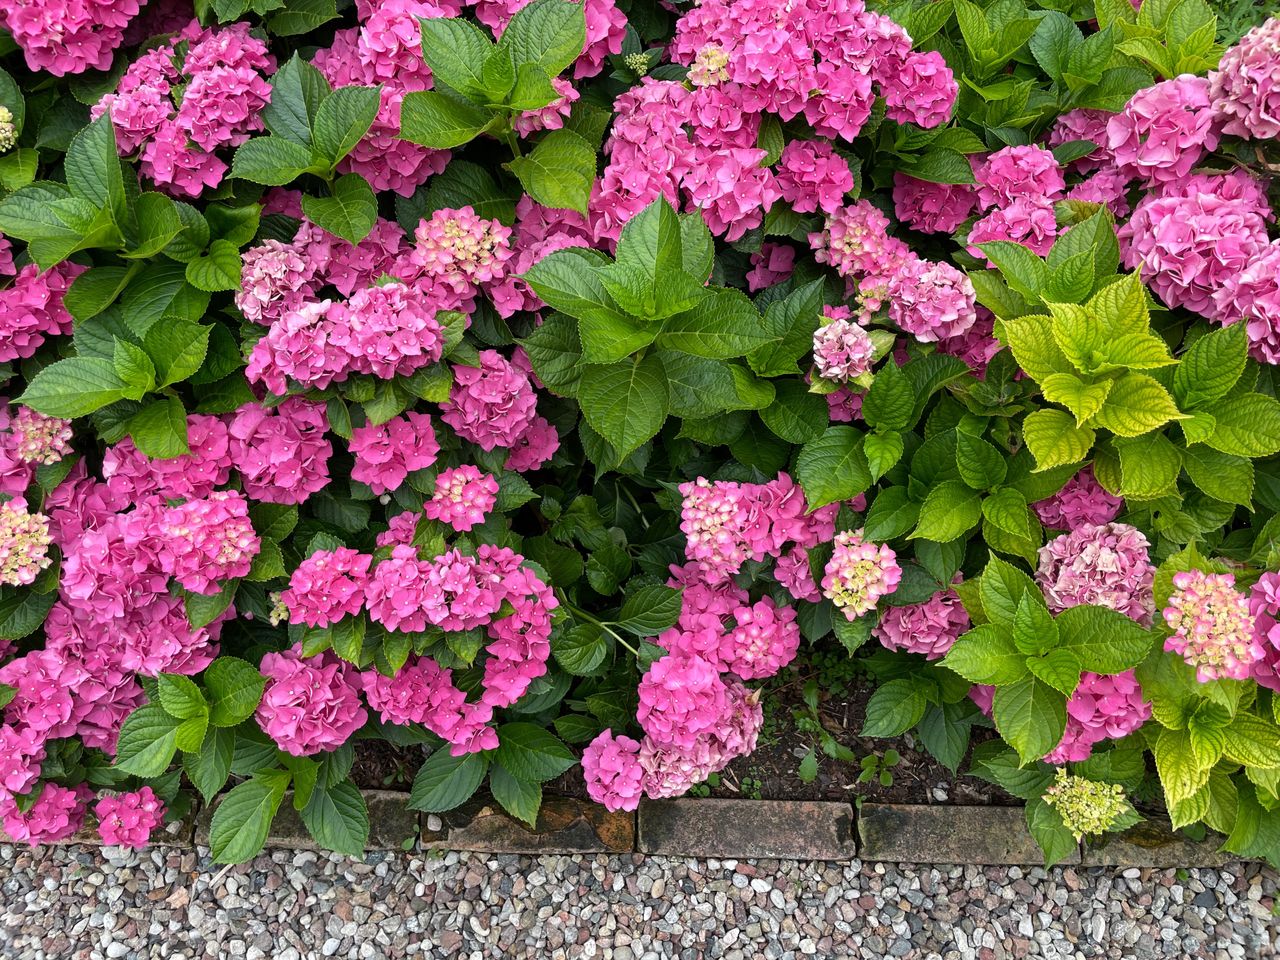 Best times to water hydrangeas for vibrant blooms